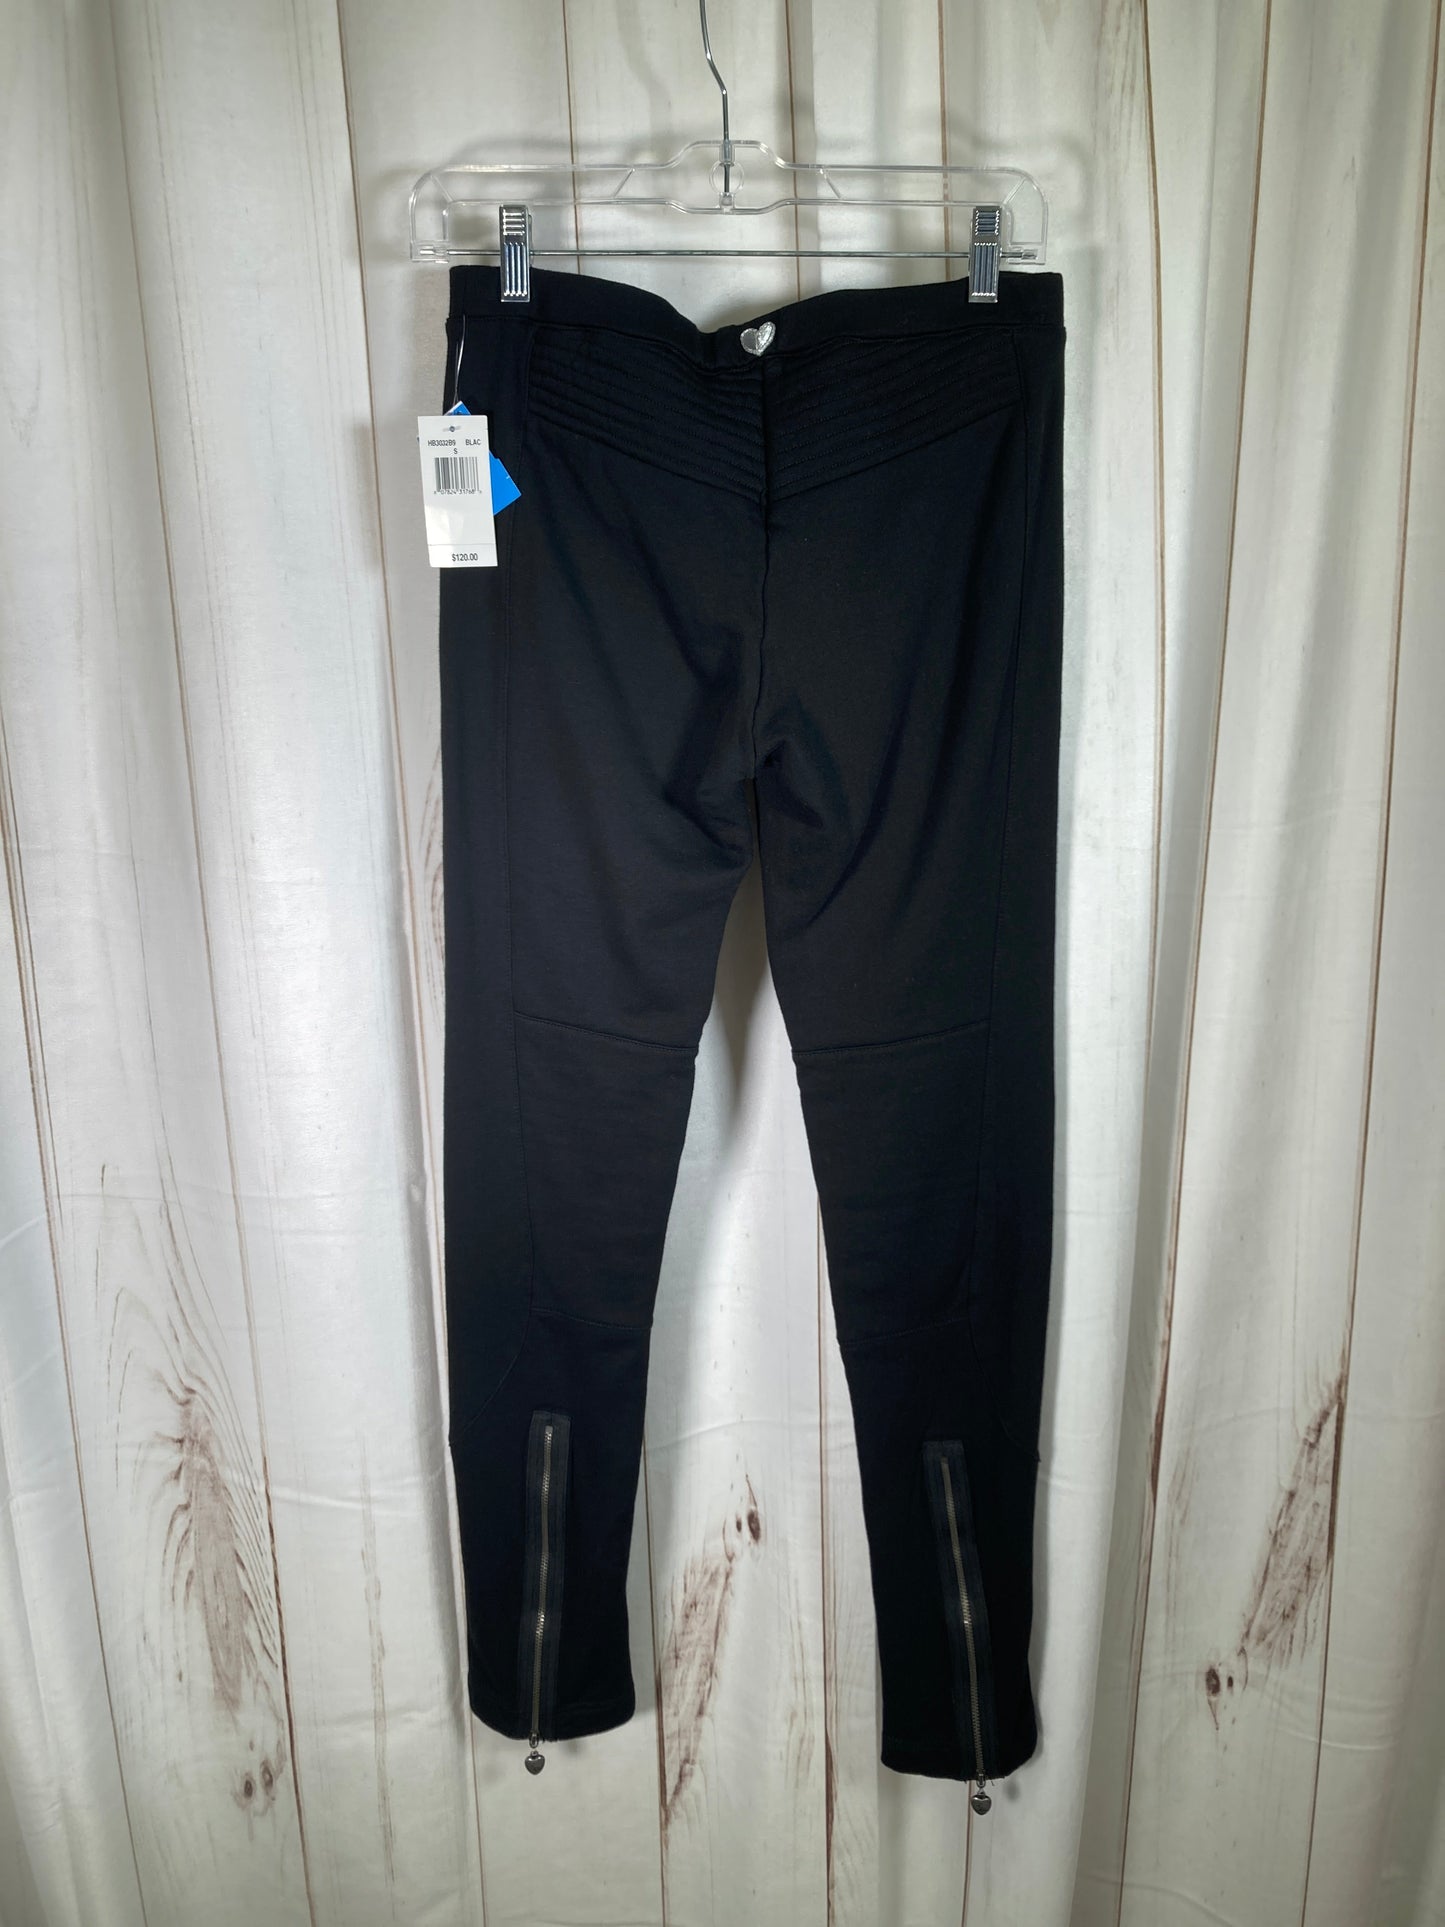 Leggings By Two Hearts Maternity  Size: 4